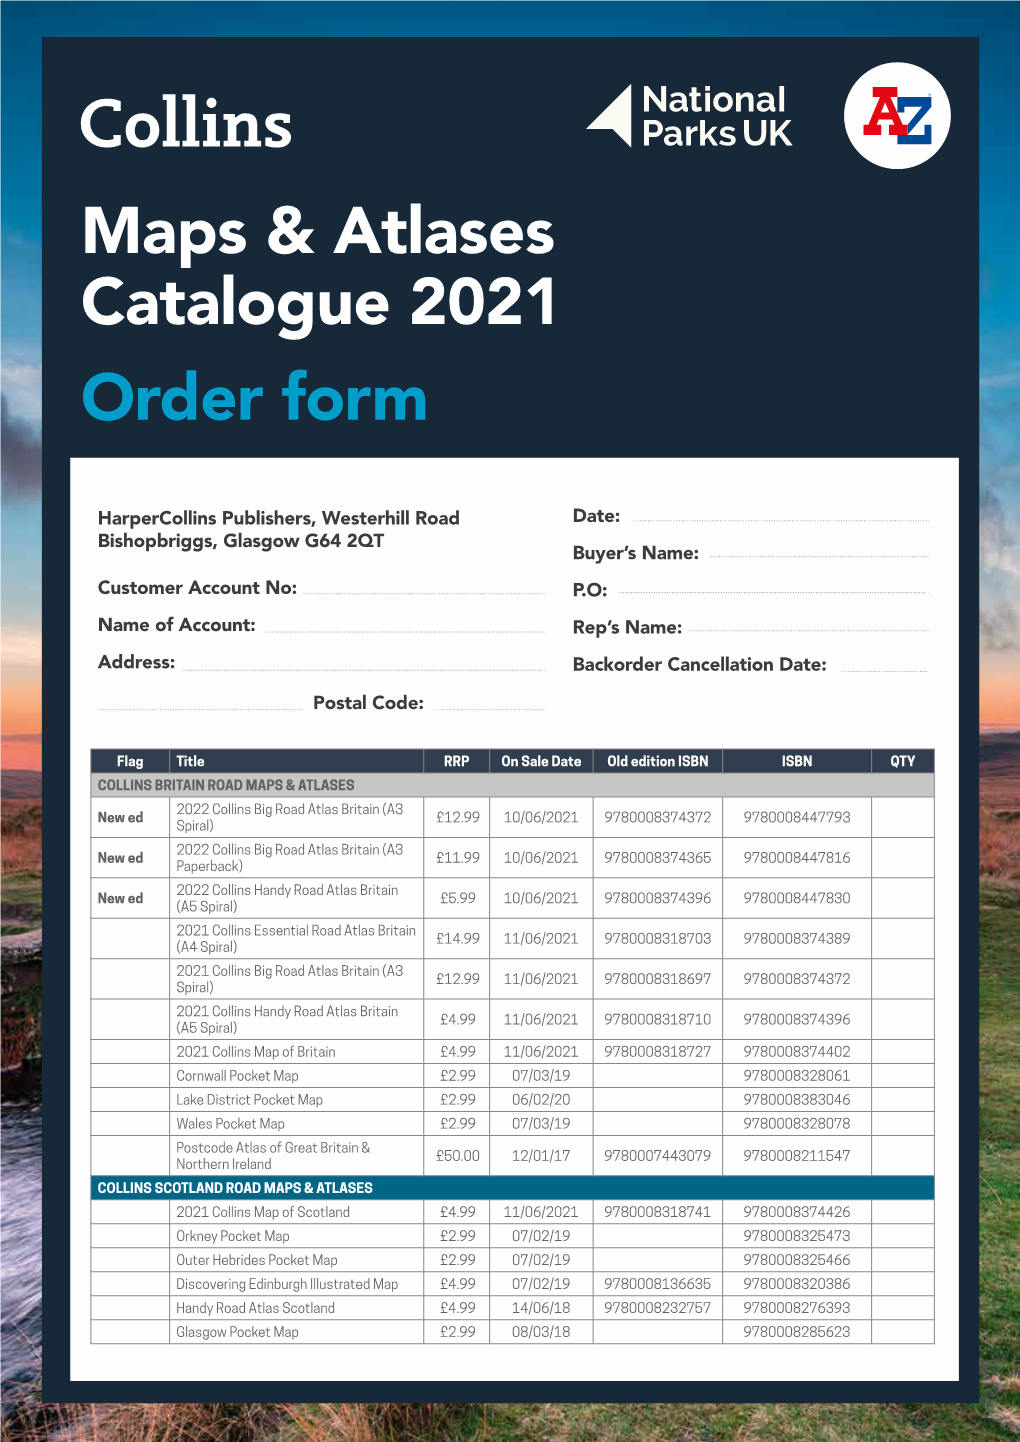 Maps & Atlases Catalogue 2021 Order Form